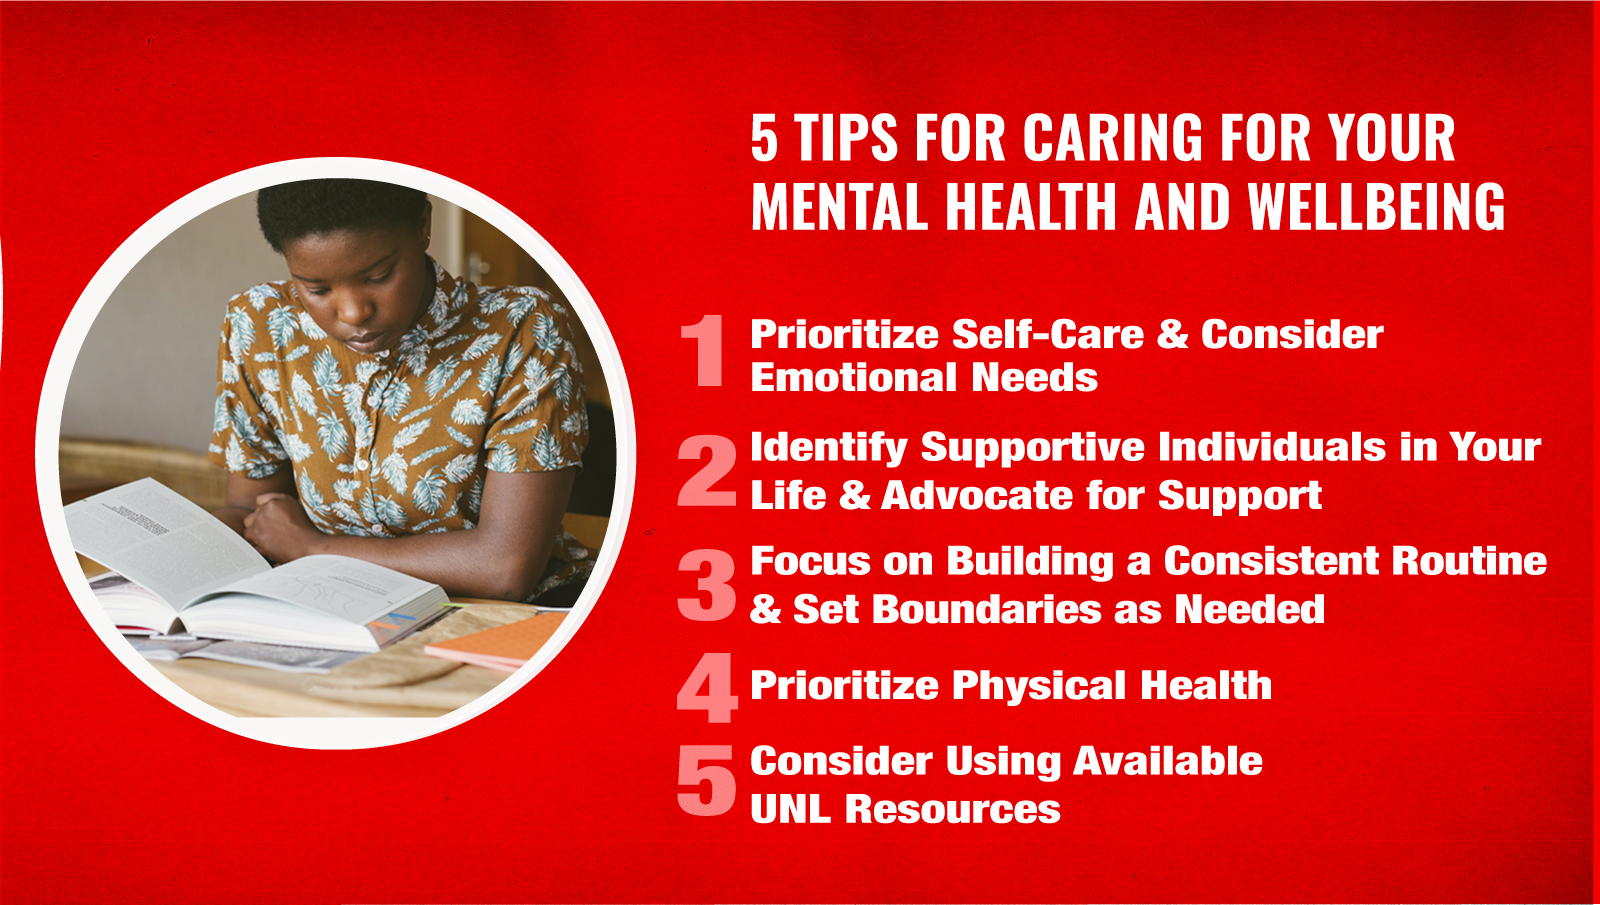 5 Tips for Caring for Your Mental Health and Wellbeing